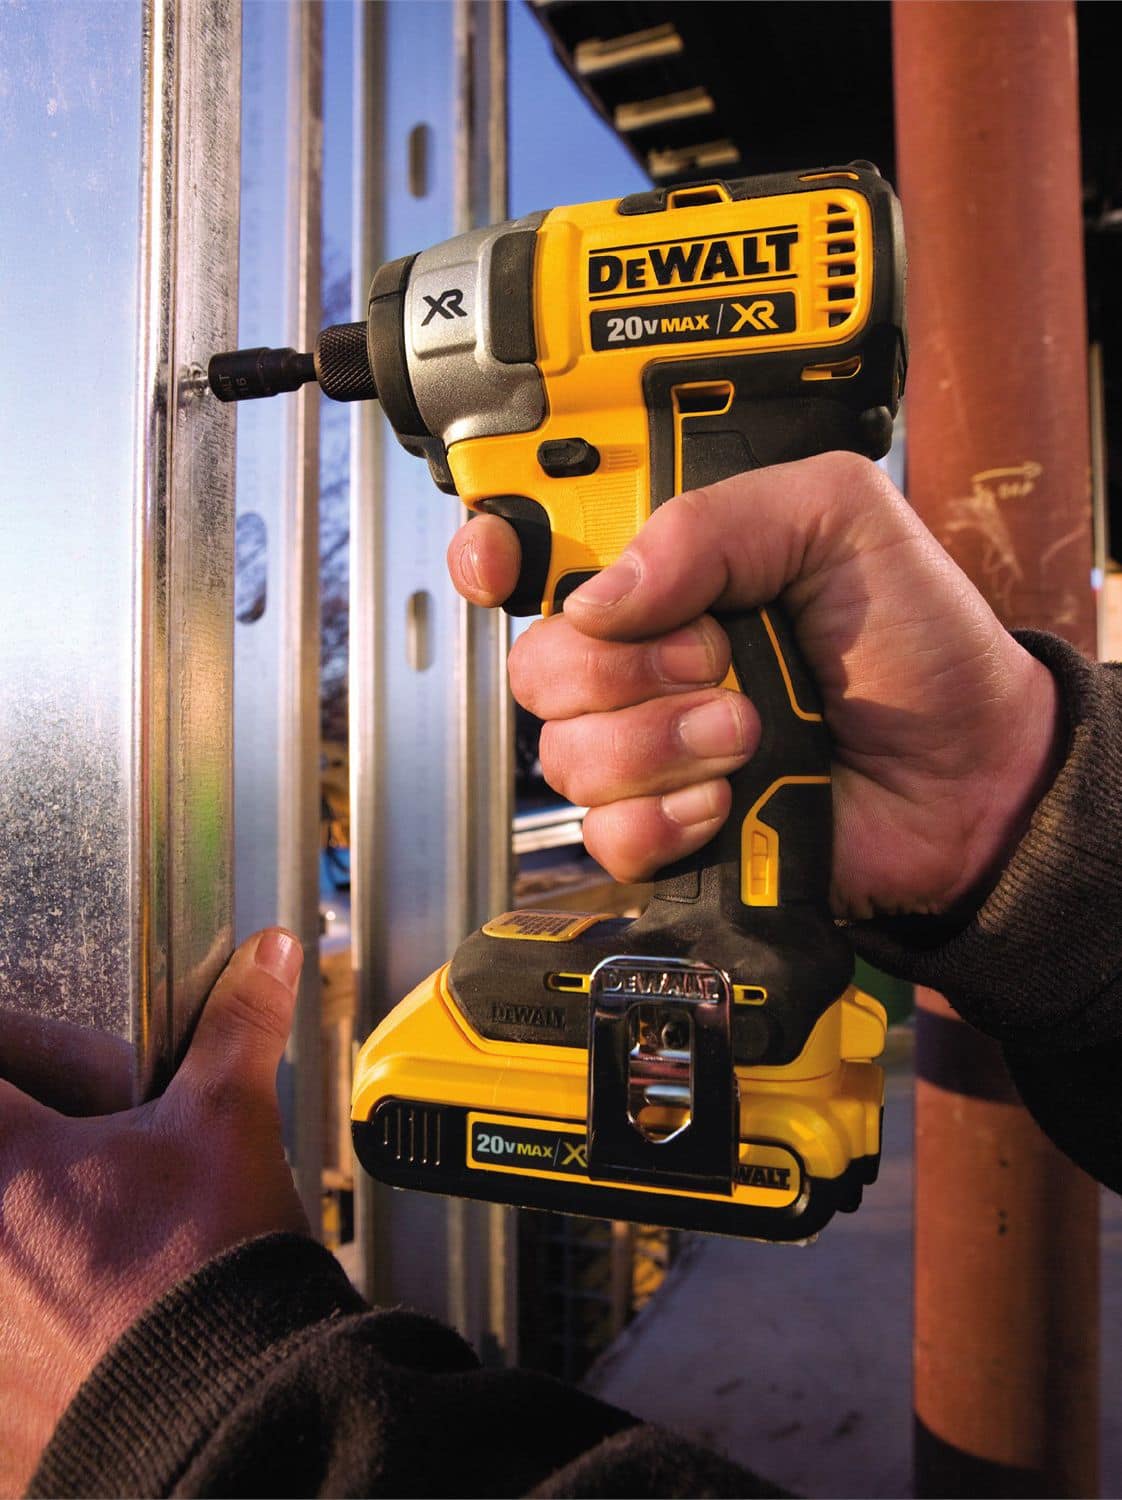 DEWALT DCF887D2 20V MAX XR Cordless 3-Speed Impact Driver Kit with Battery   Charger, 1/4-in Canadian Tire